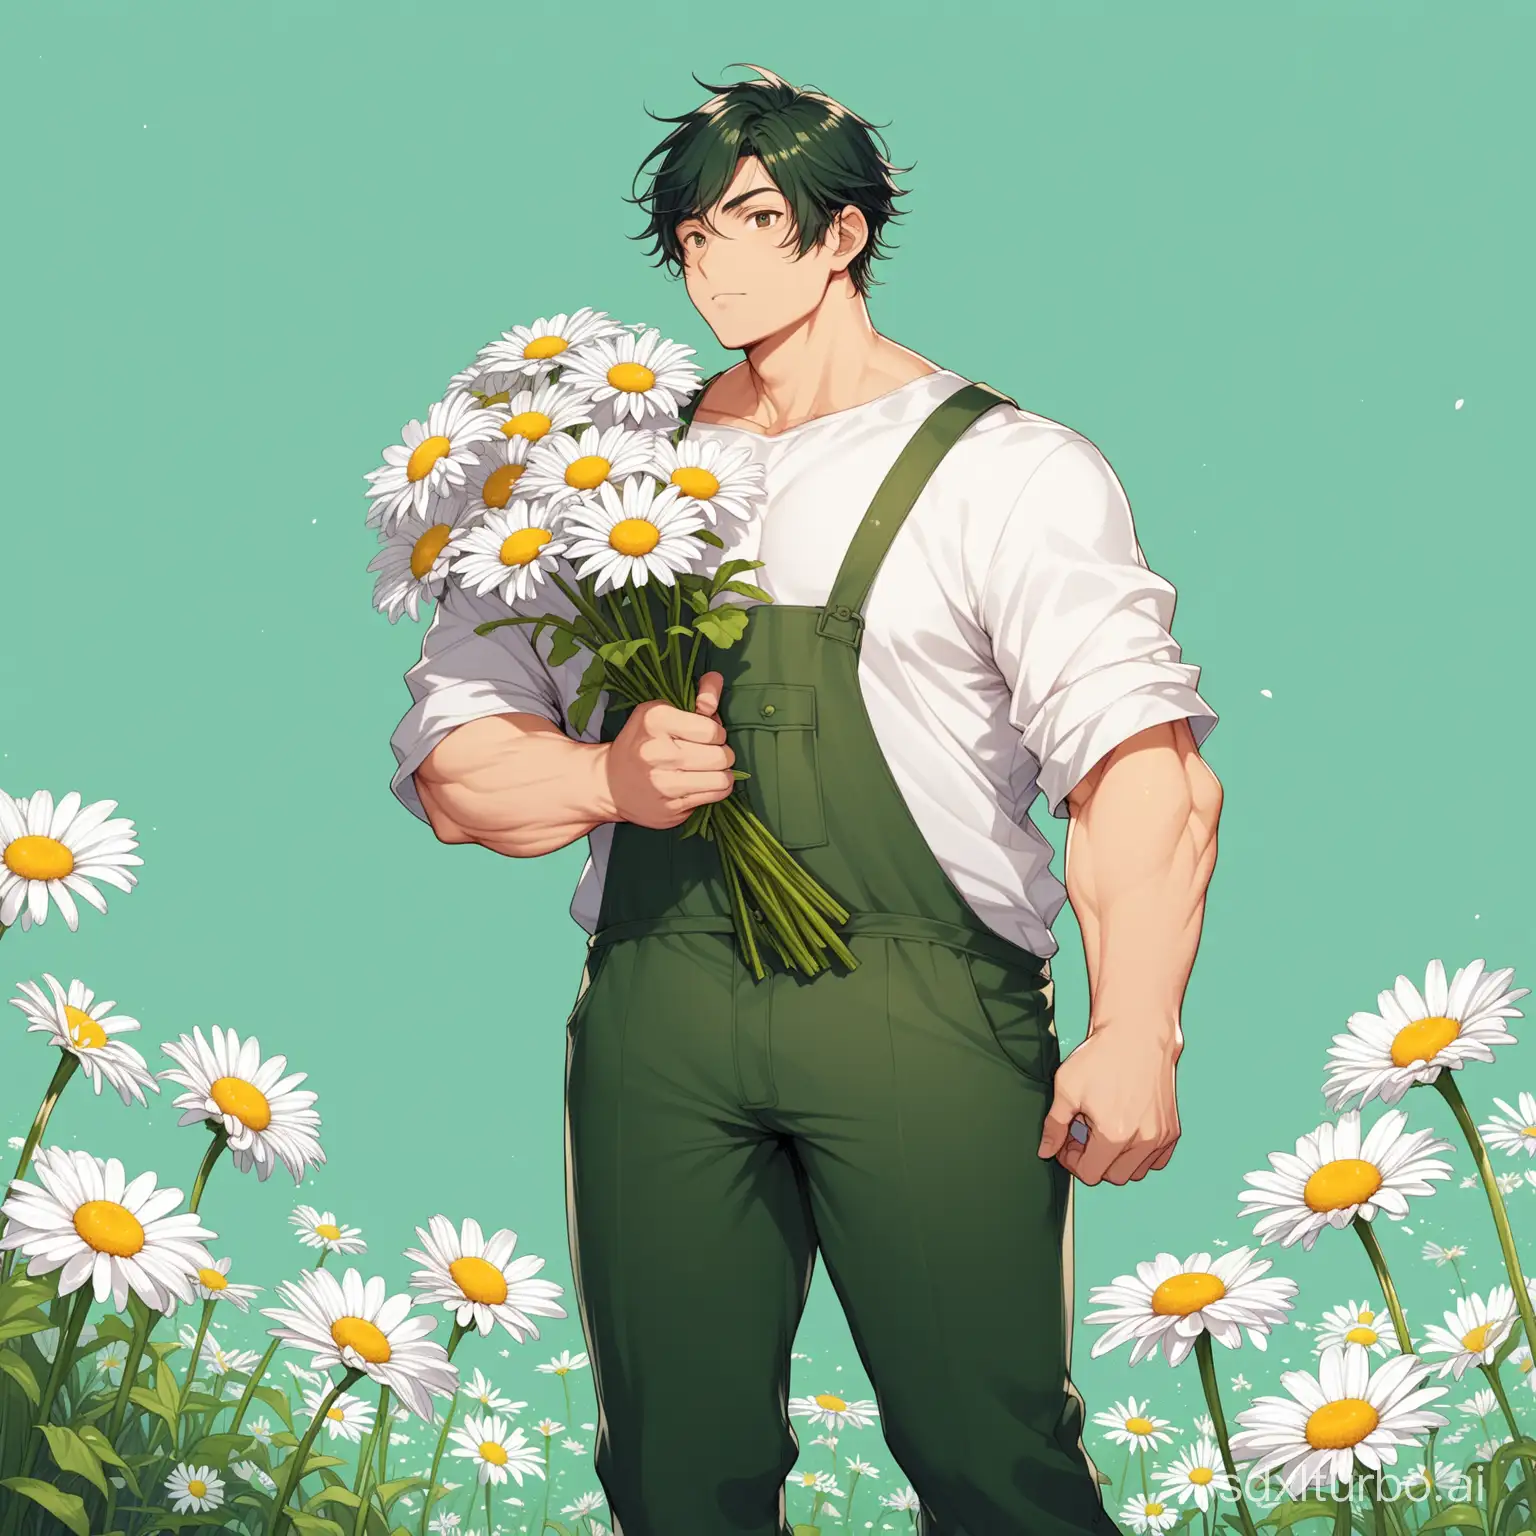 A mascular man who's 180cm tall, little bit bulky with a bunch of Daisy flowers in hand